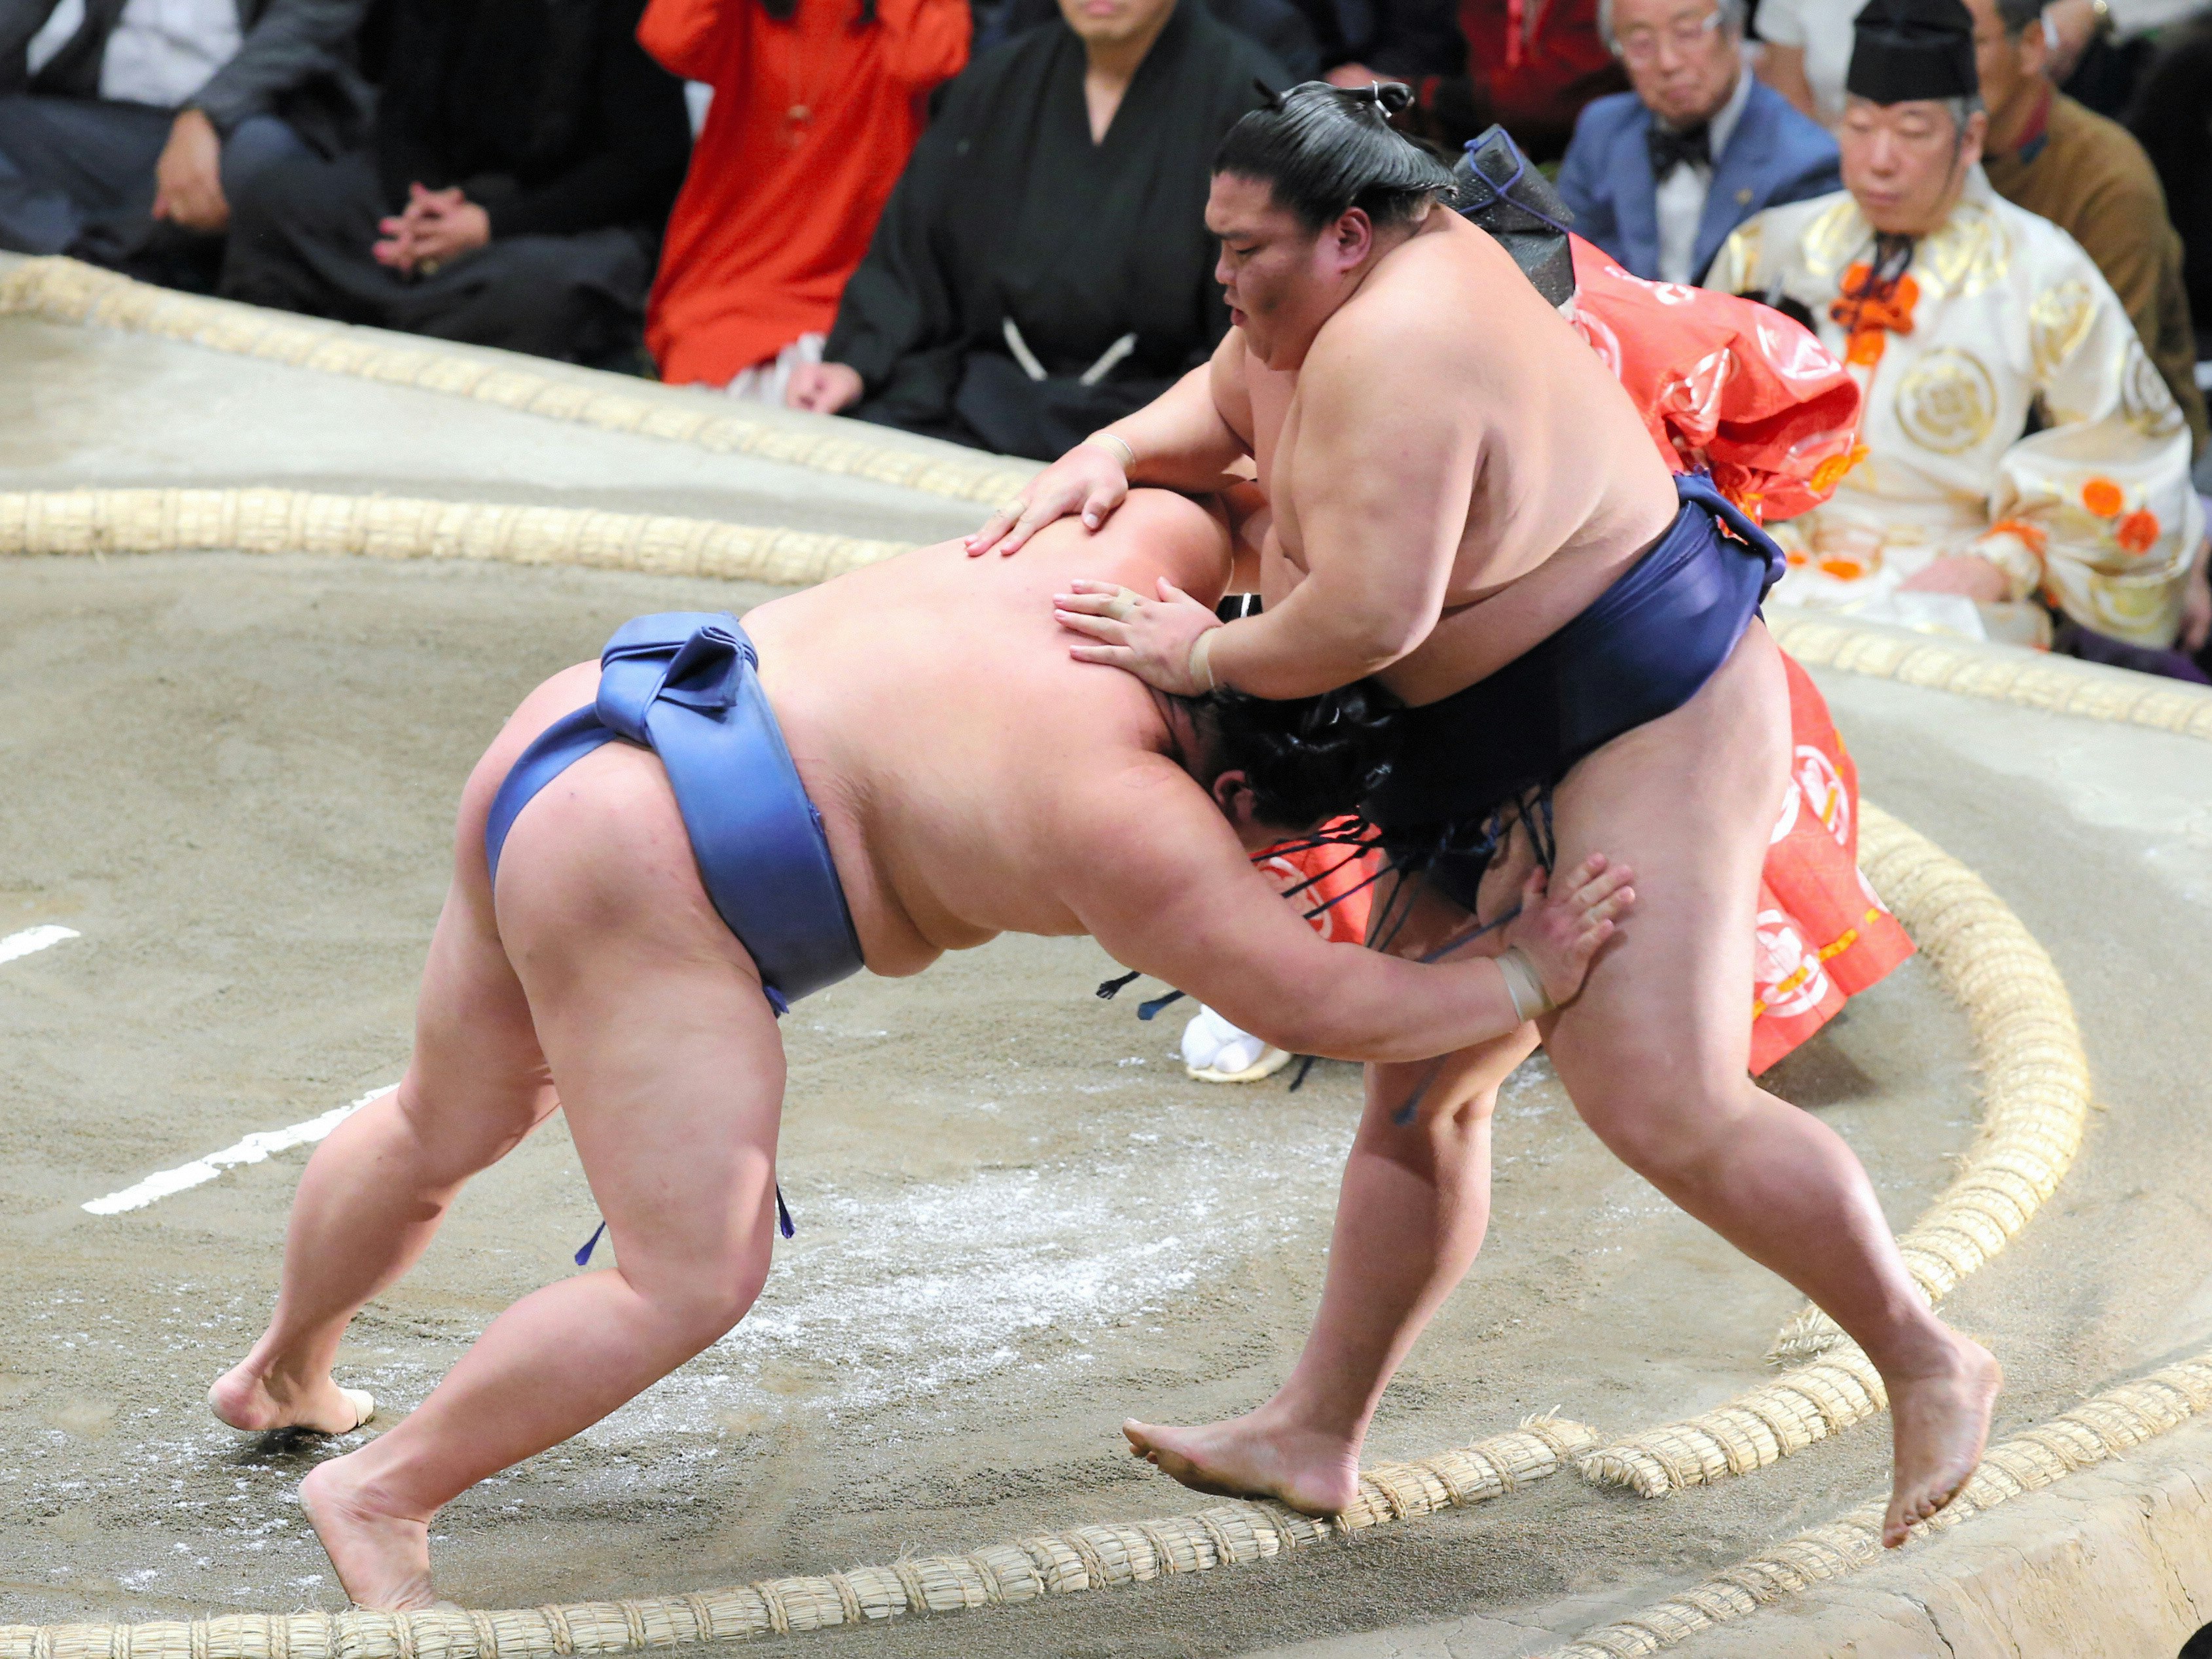 In a dramatic moment in a wrestling ring, circled by salt, one sumo wrestler bends forward to lunge at his opponent, who resists, with a look of concentration